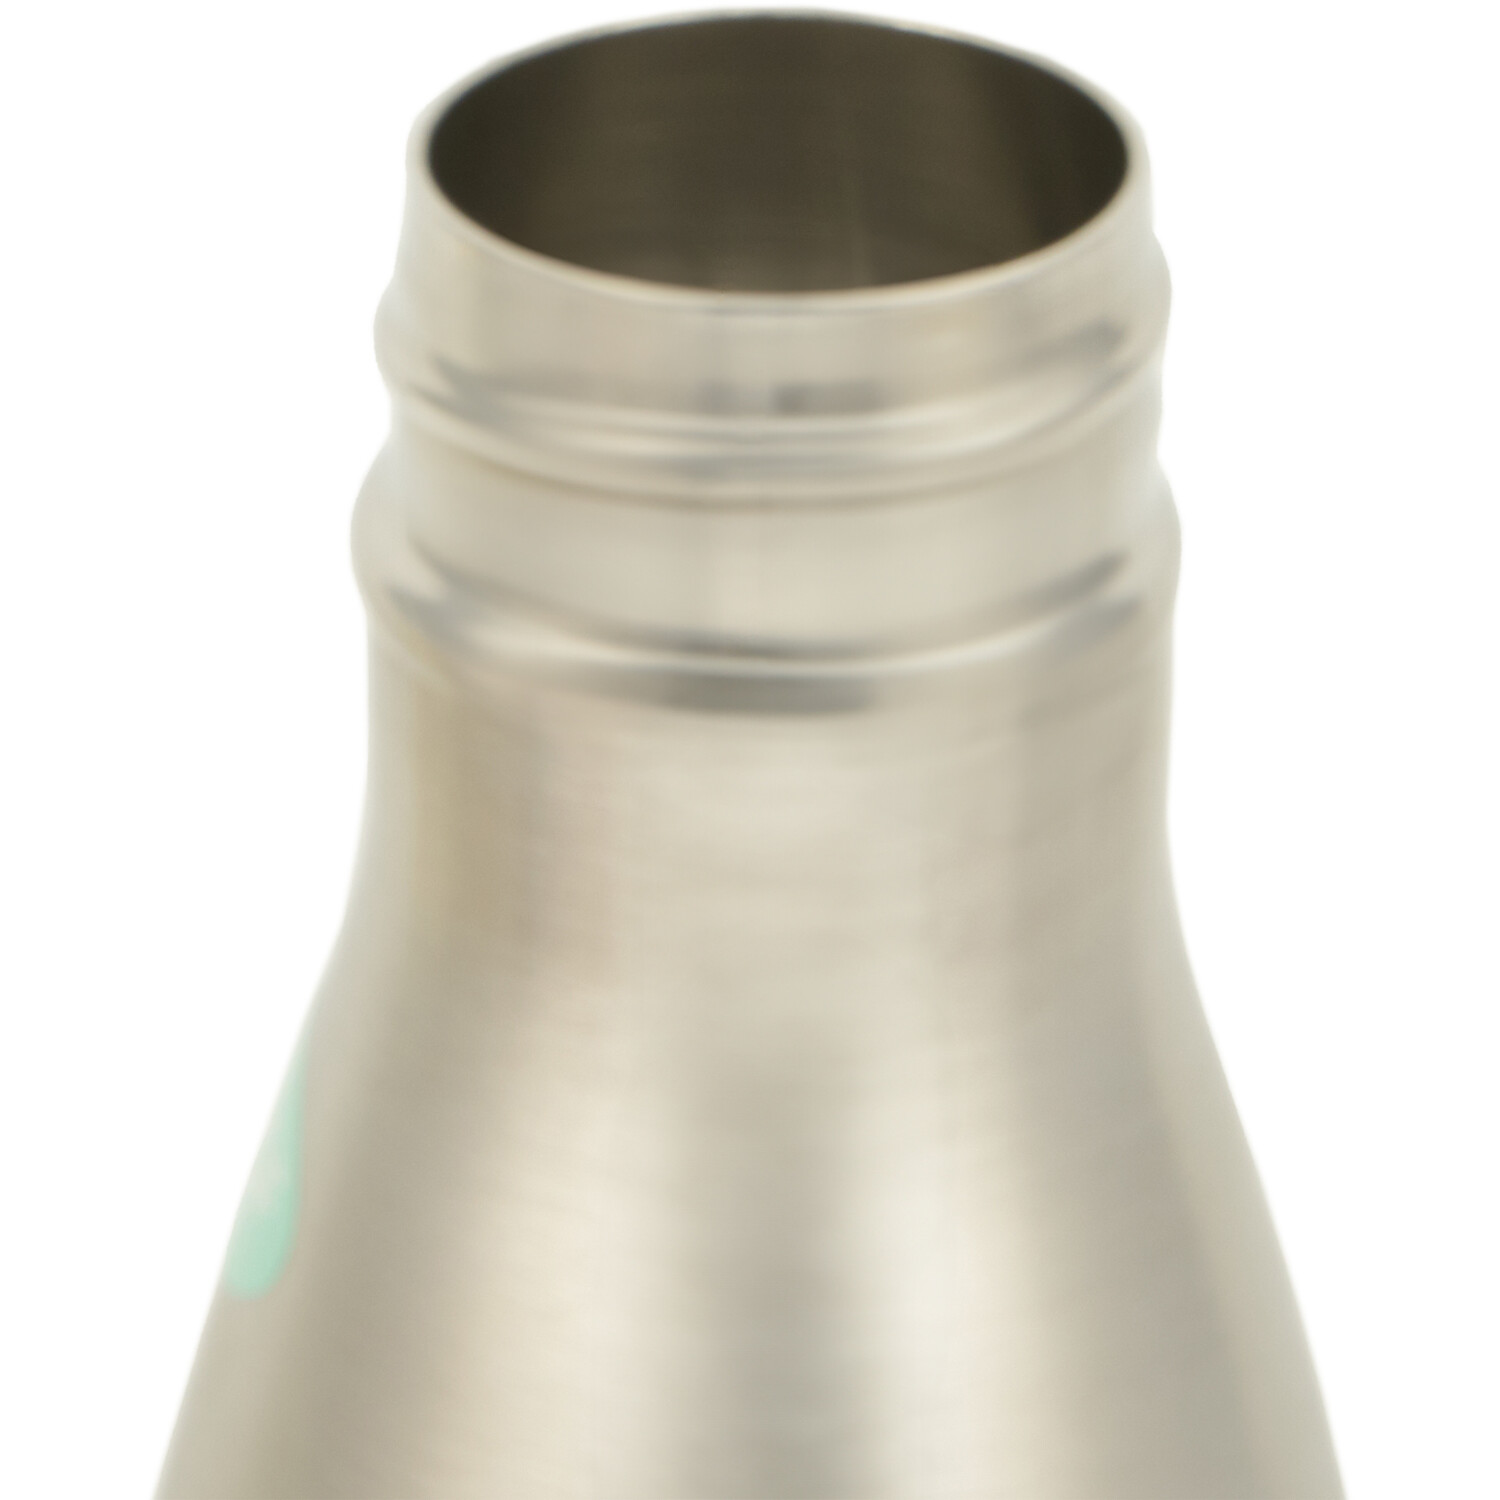 Nitro Everyday 2-in-1 Flask and Bottle - Gold Image 3